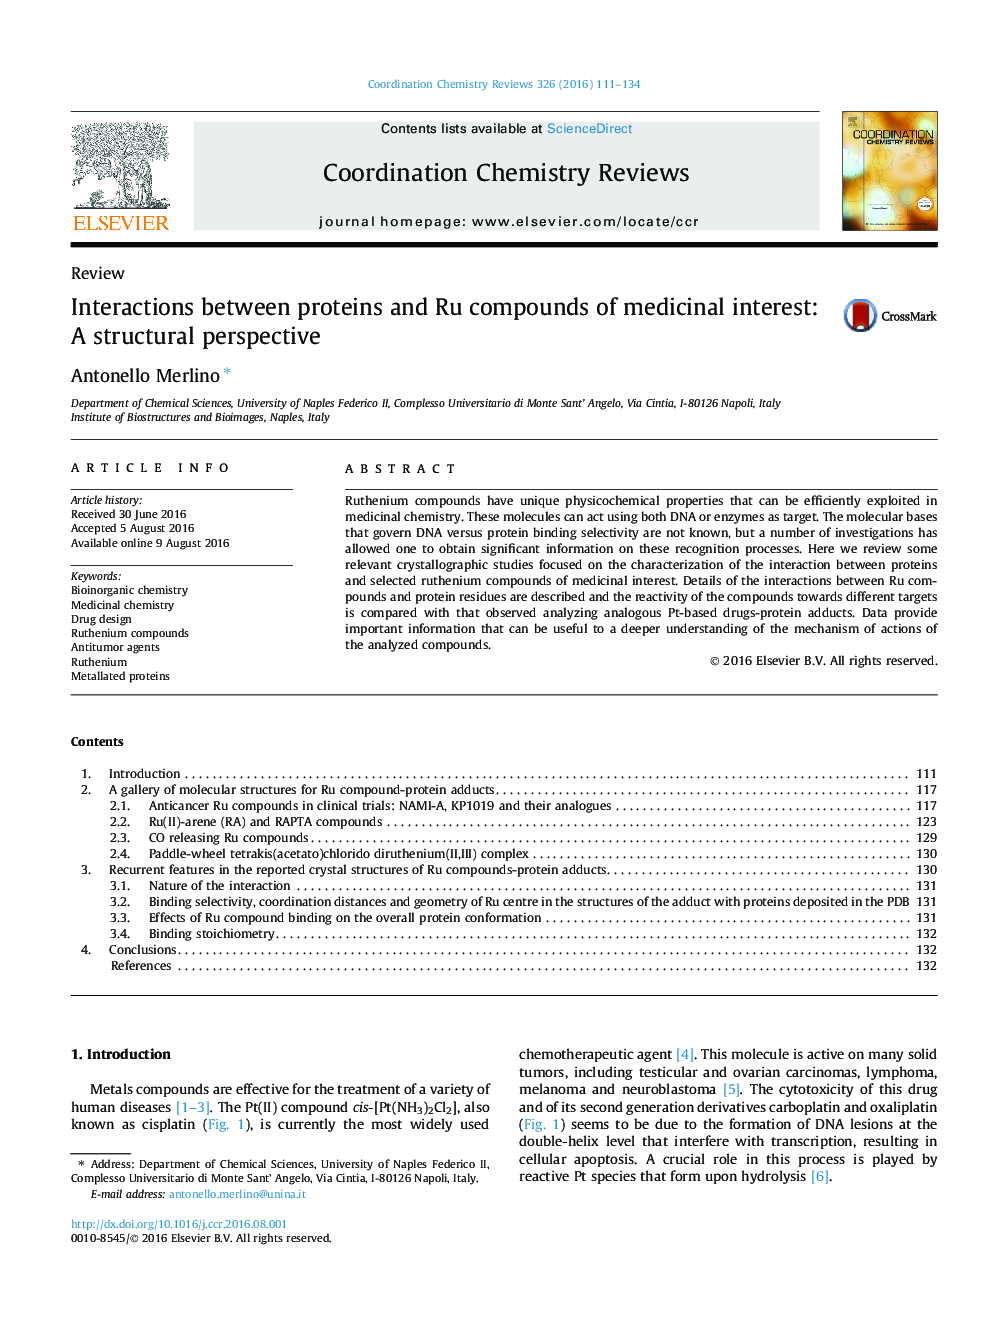 Interactions between proteins and Ru compounds of medicinal interest: A structural perspective